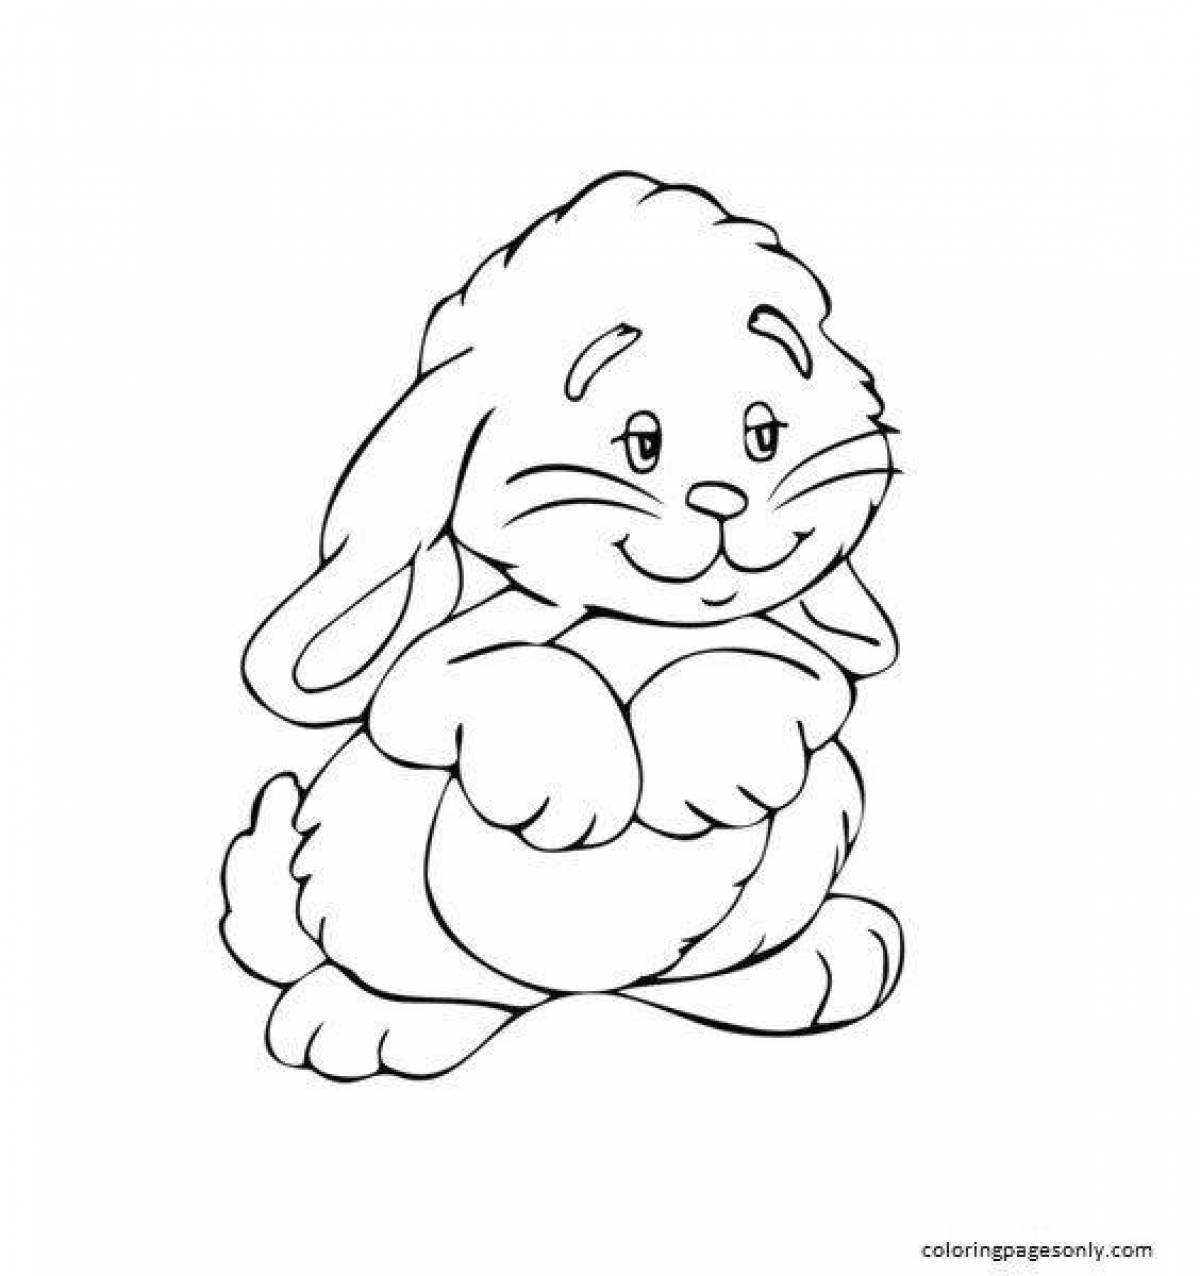 Me Bunny Live Coloring